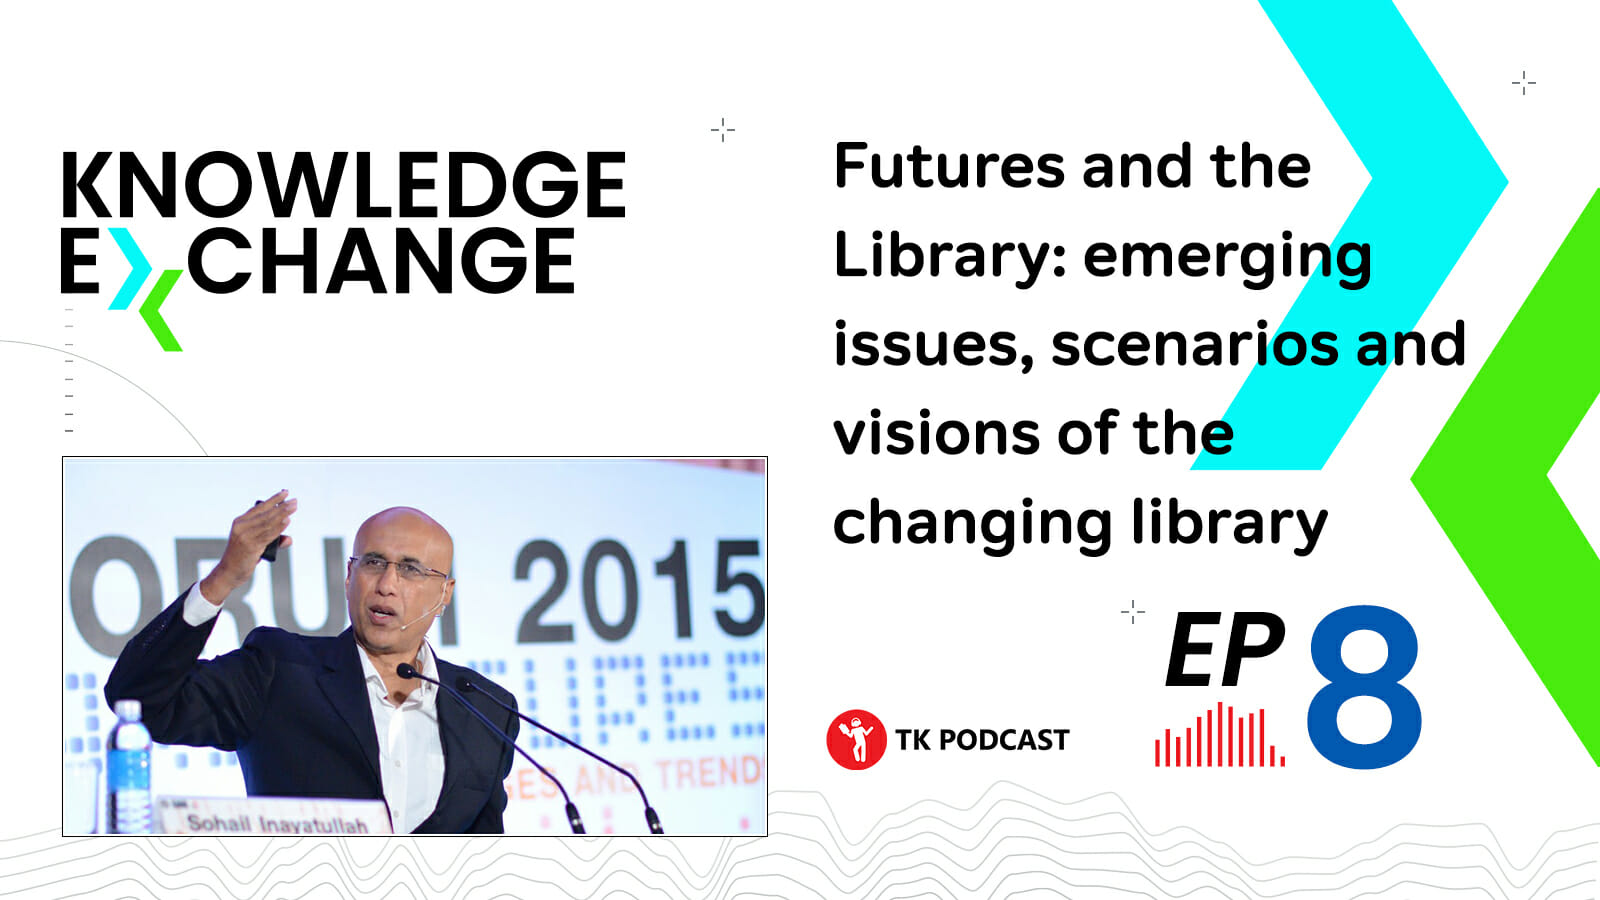 Futures and the Library: emerging issues, scenarios and visions of the changing library